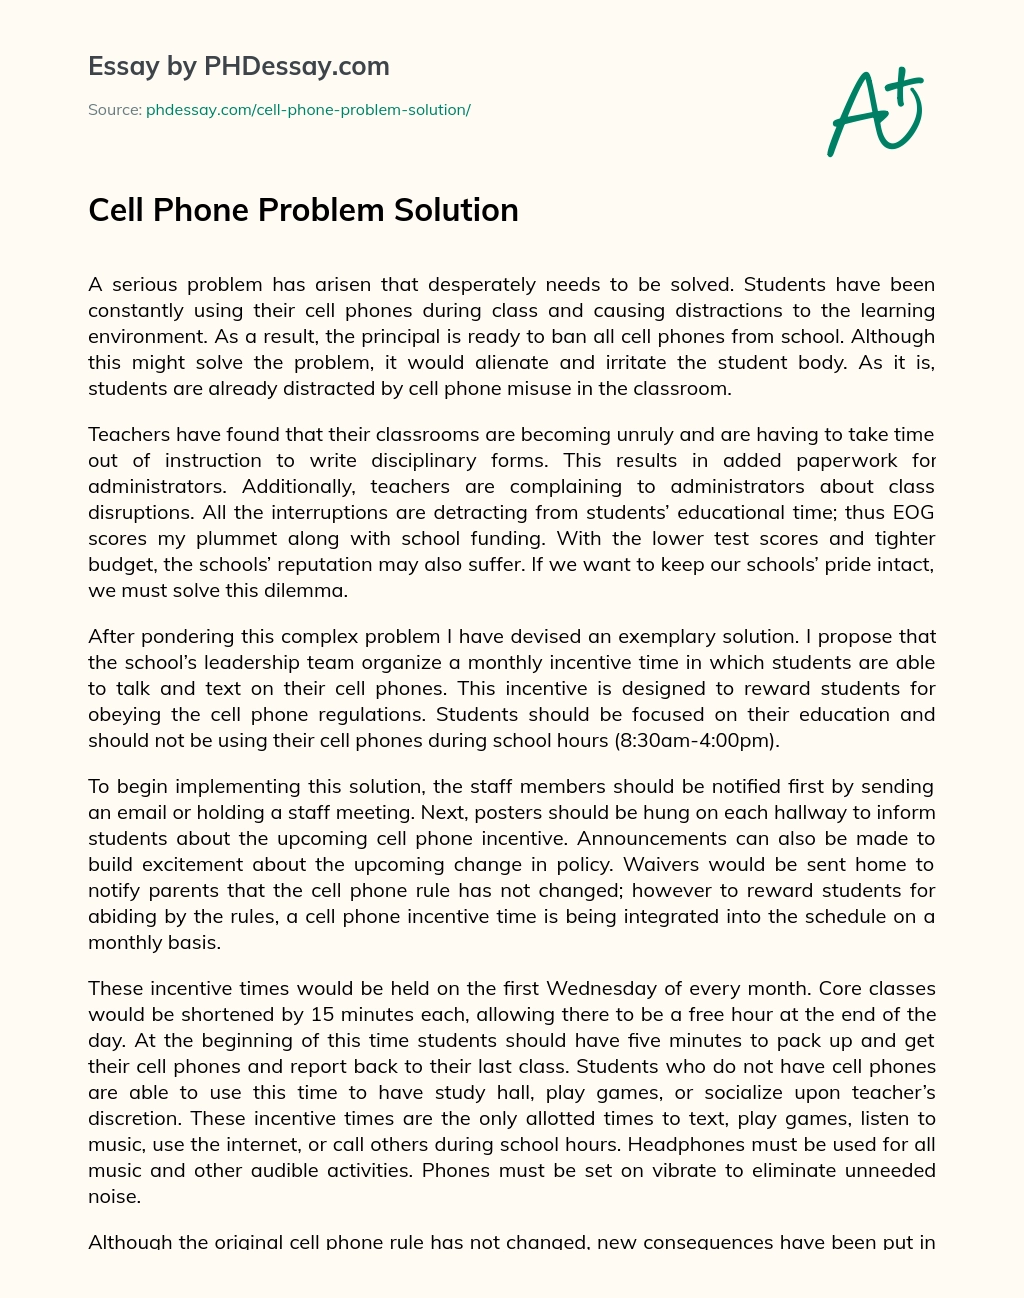 Cell Phone Problem Solution essay